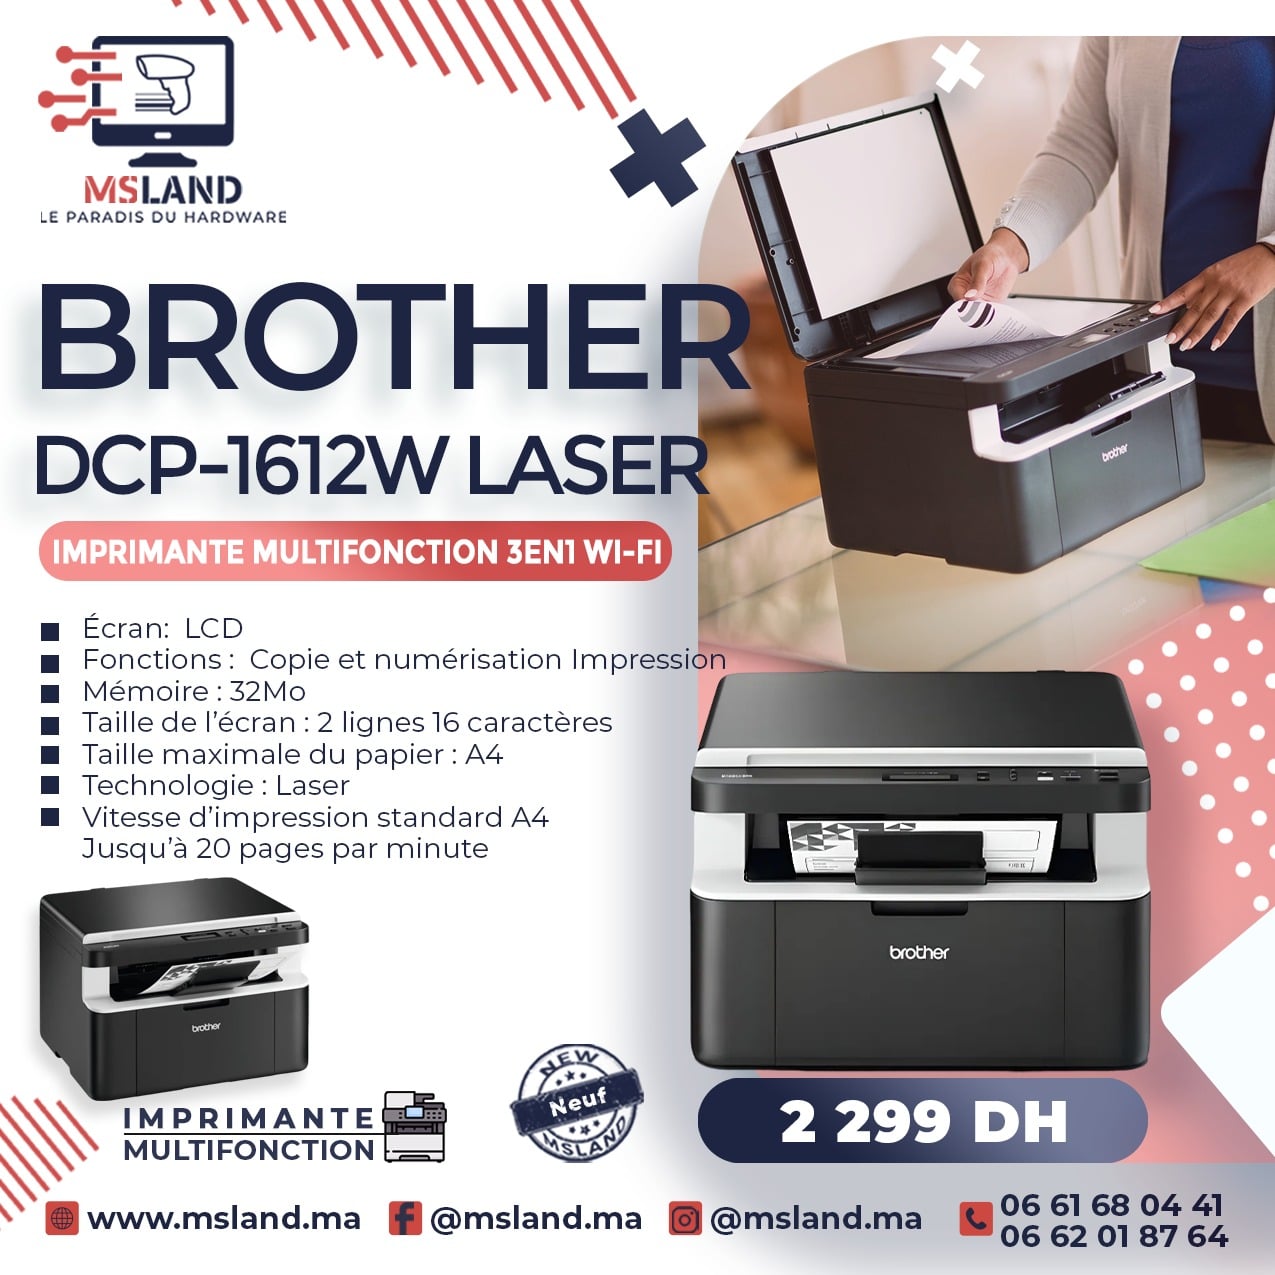 Imprimante multifonction BROTHER DCP-1612W